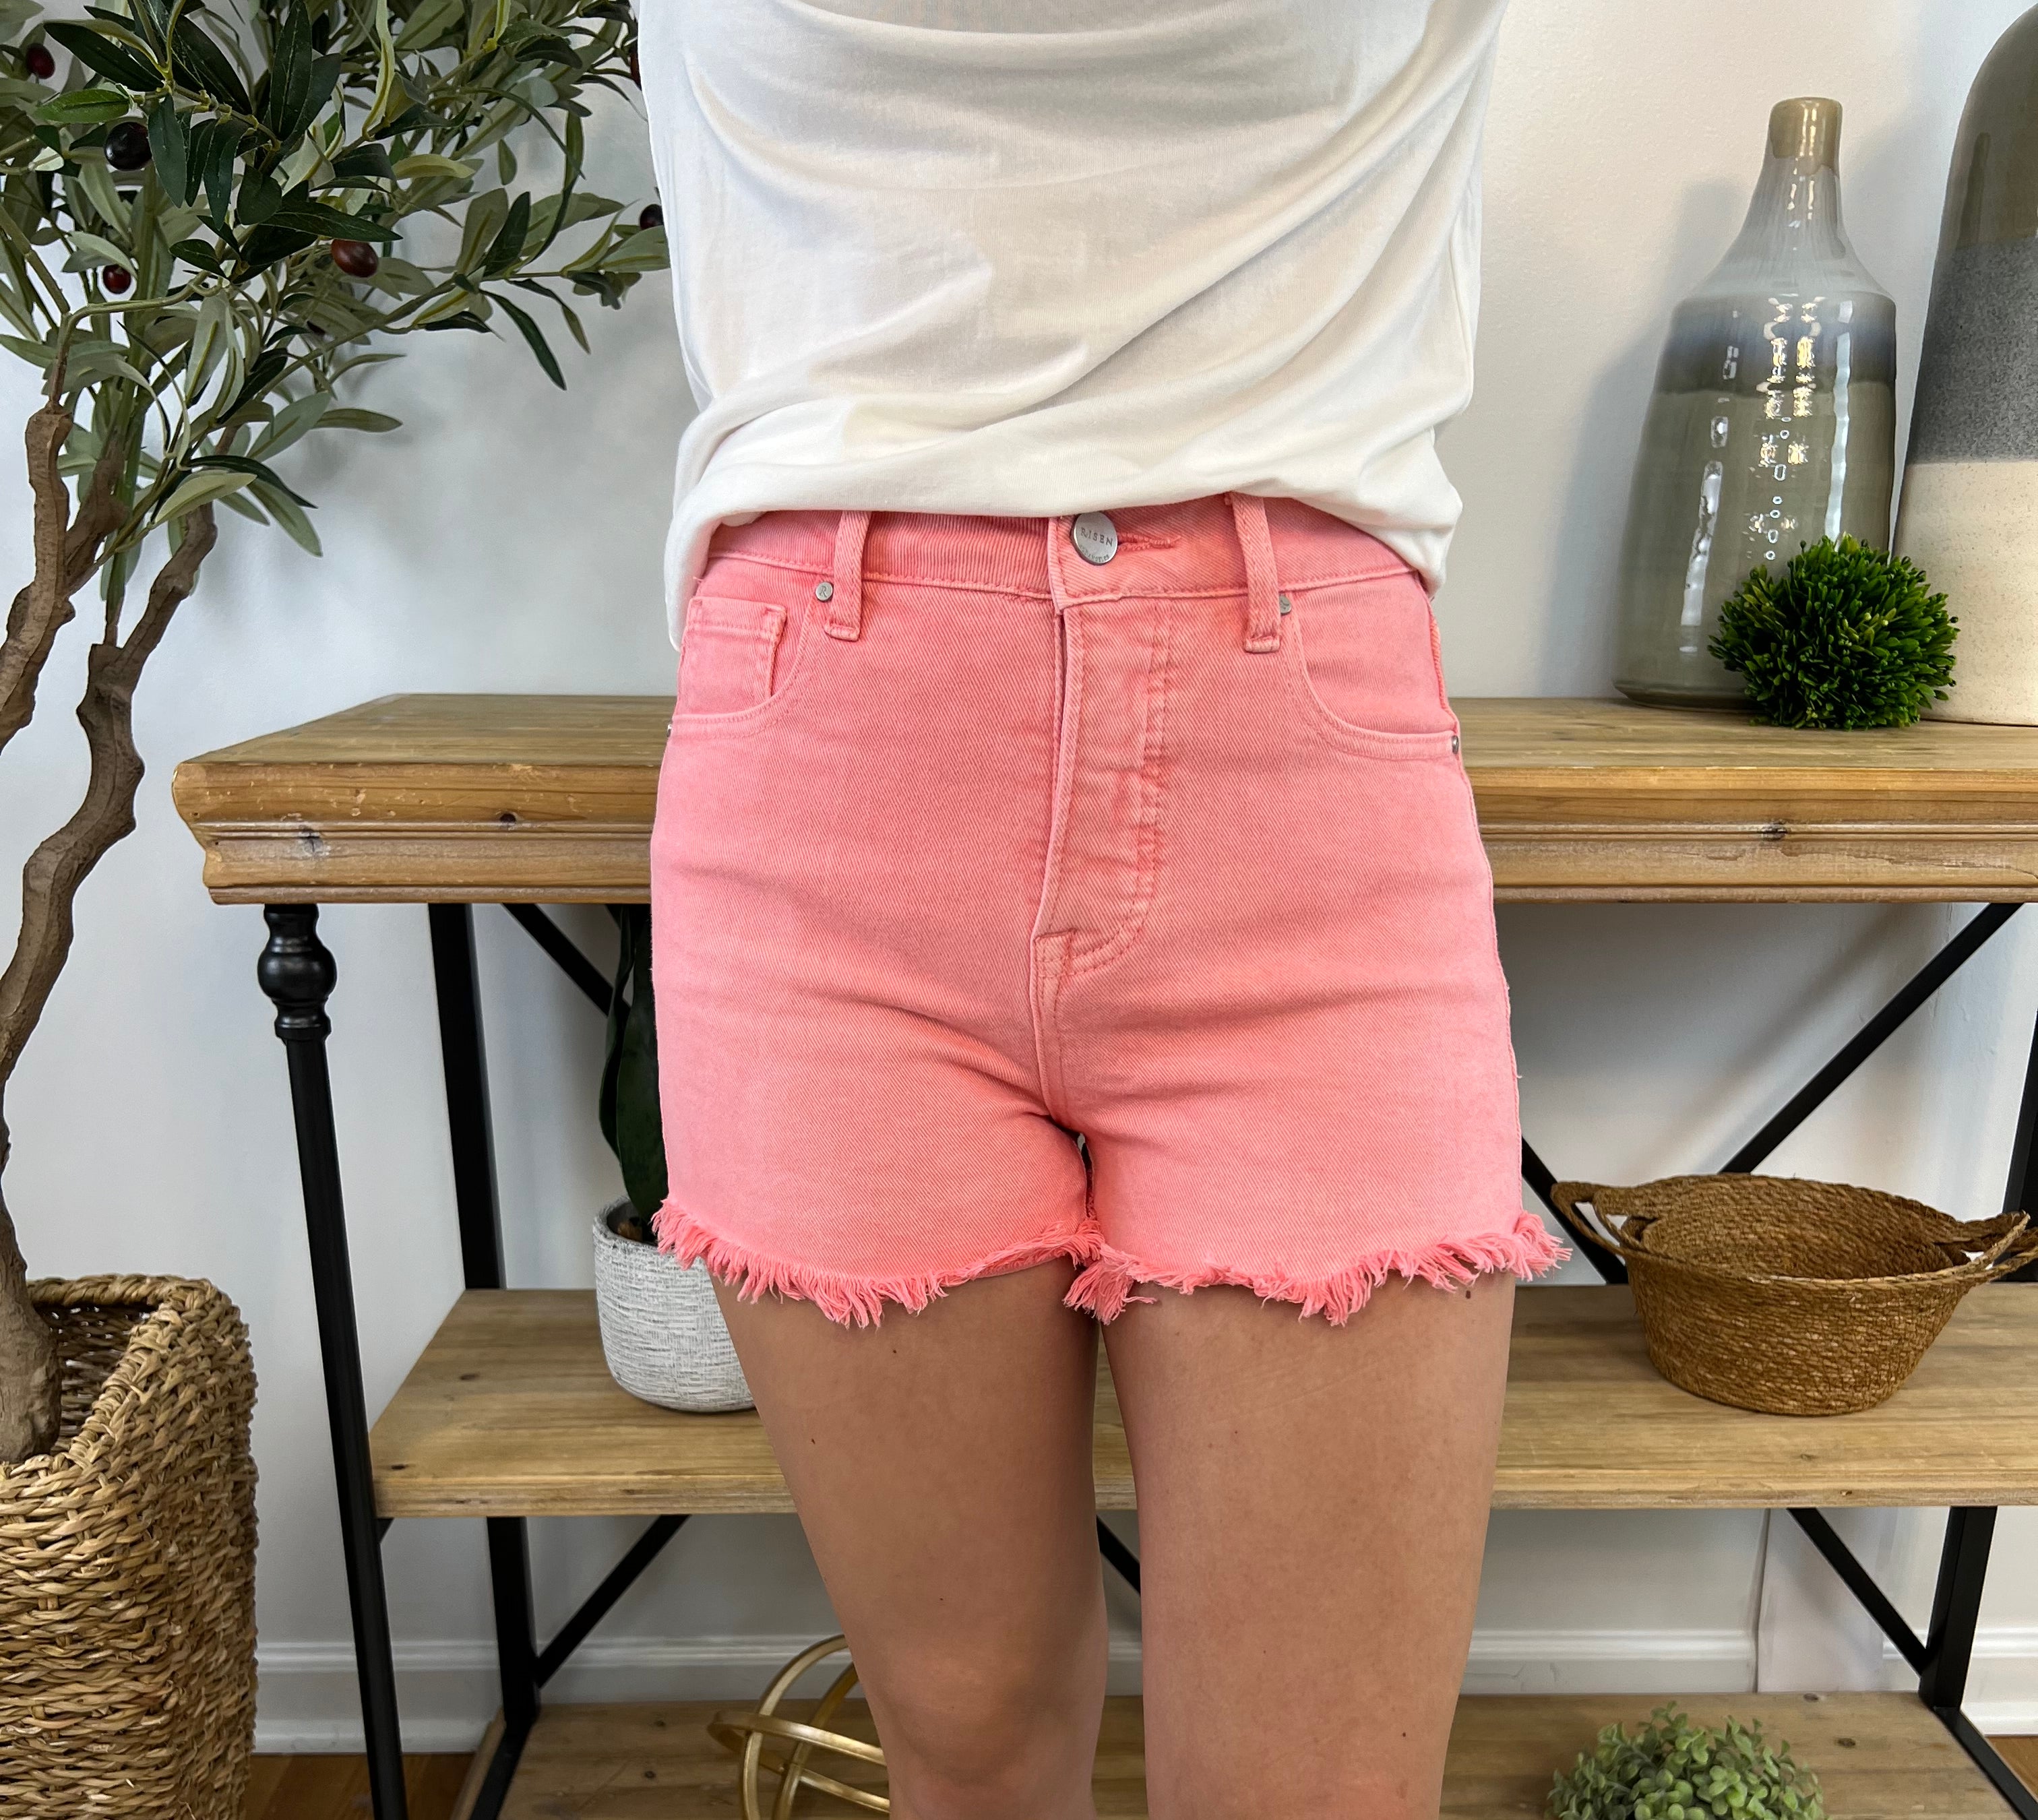 Pink Sunset Risen Shorts-230 Skirts/Shorts-Risen-The Lovely Closet, Women's Fashion Boutique in Alexandria, KY